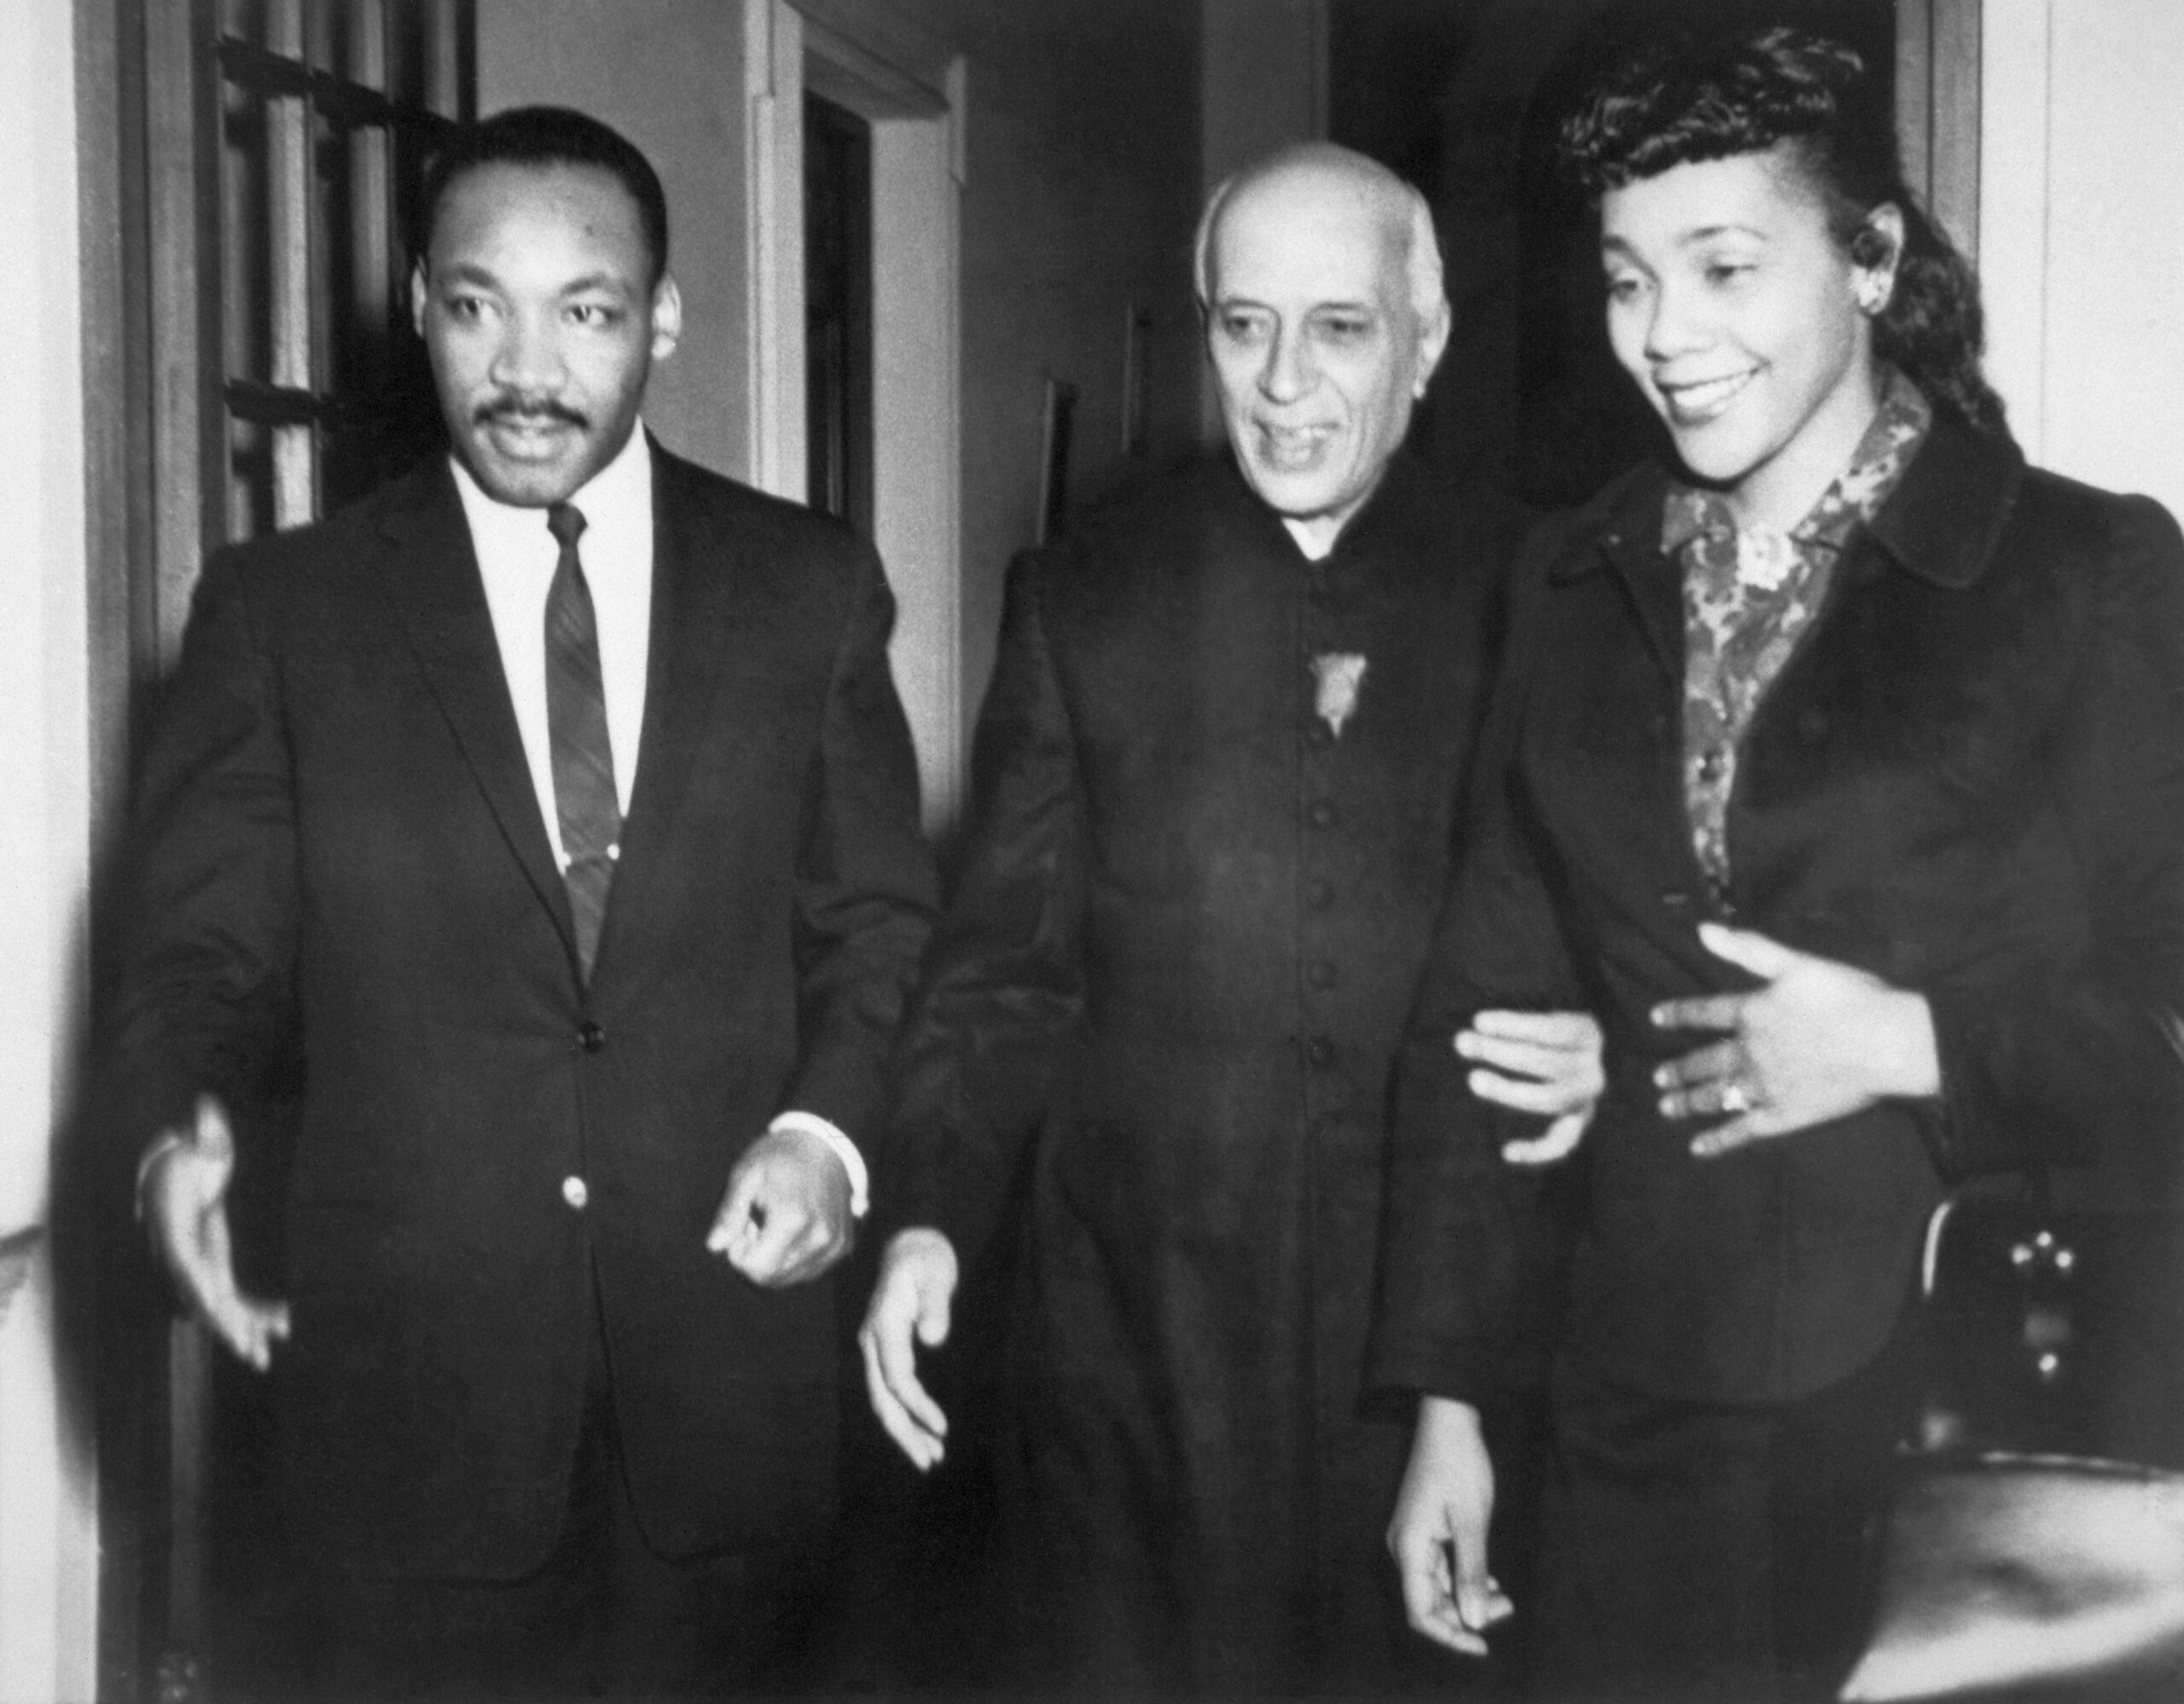 In 1959, Indian Prime Minister Jawaharlal Nehru (C) is flanked by his guests, American civil rights leader Dr. Martin Luther King (L) and wife Coretta Scott King during a one-month visit to India at the invitation of the Gandhi Peace Foundation.